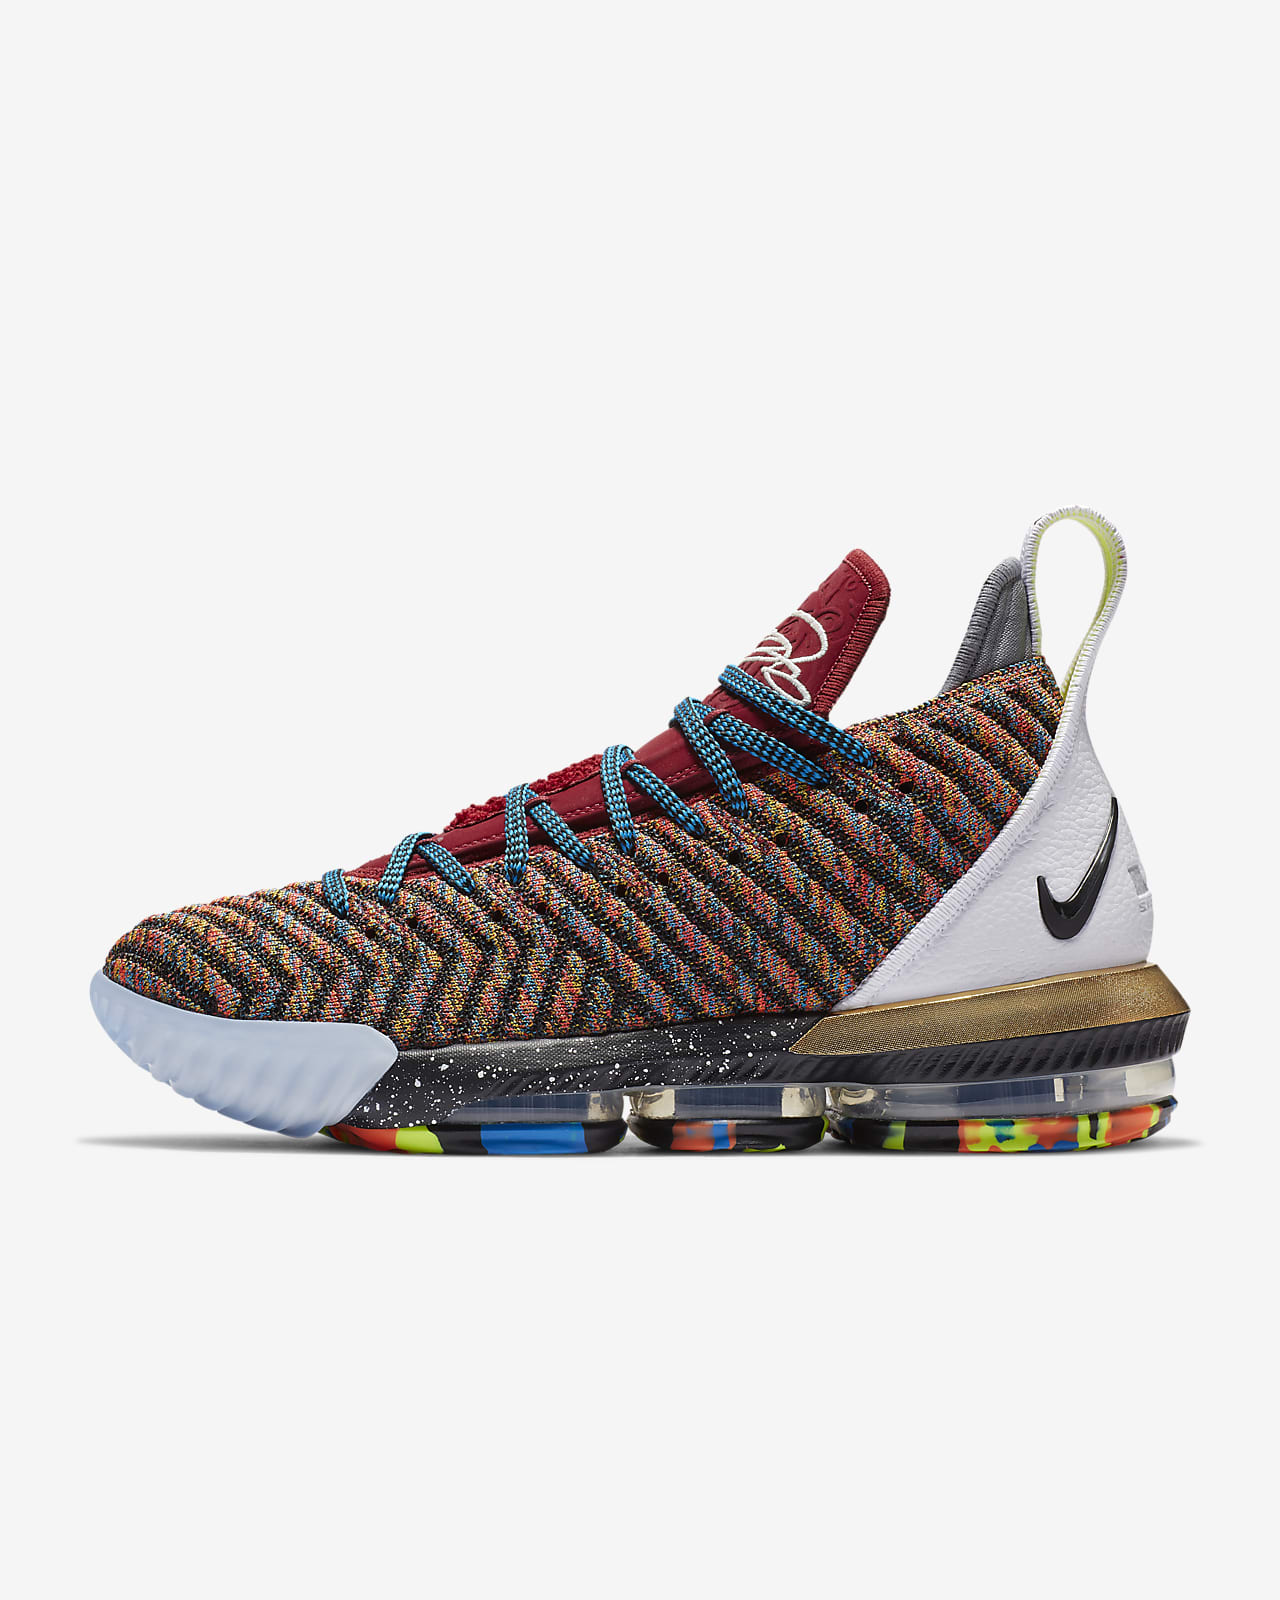 pictures of lebron 16